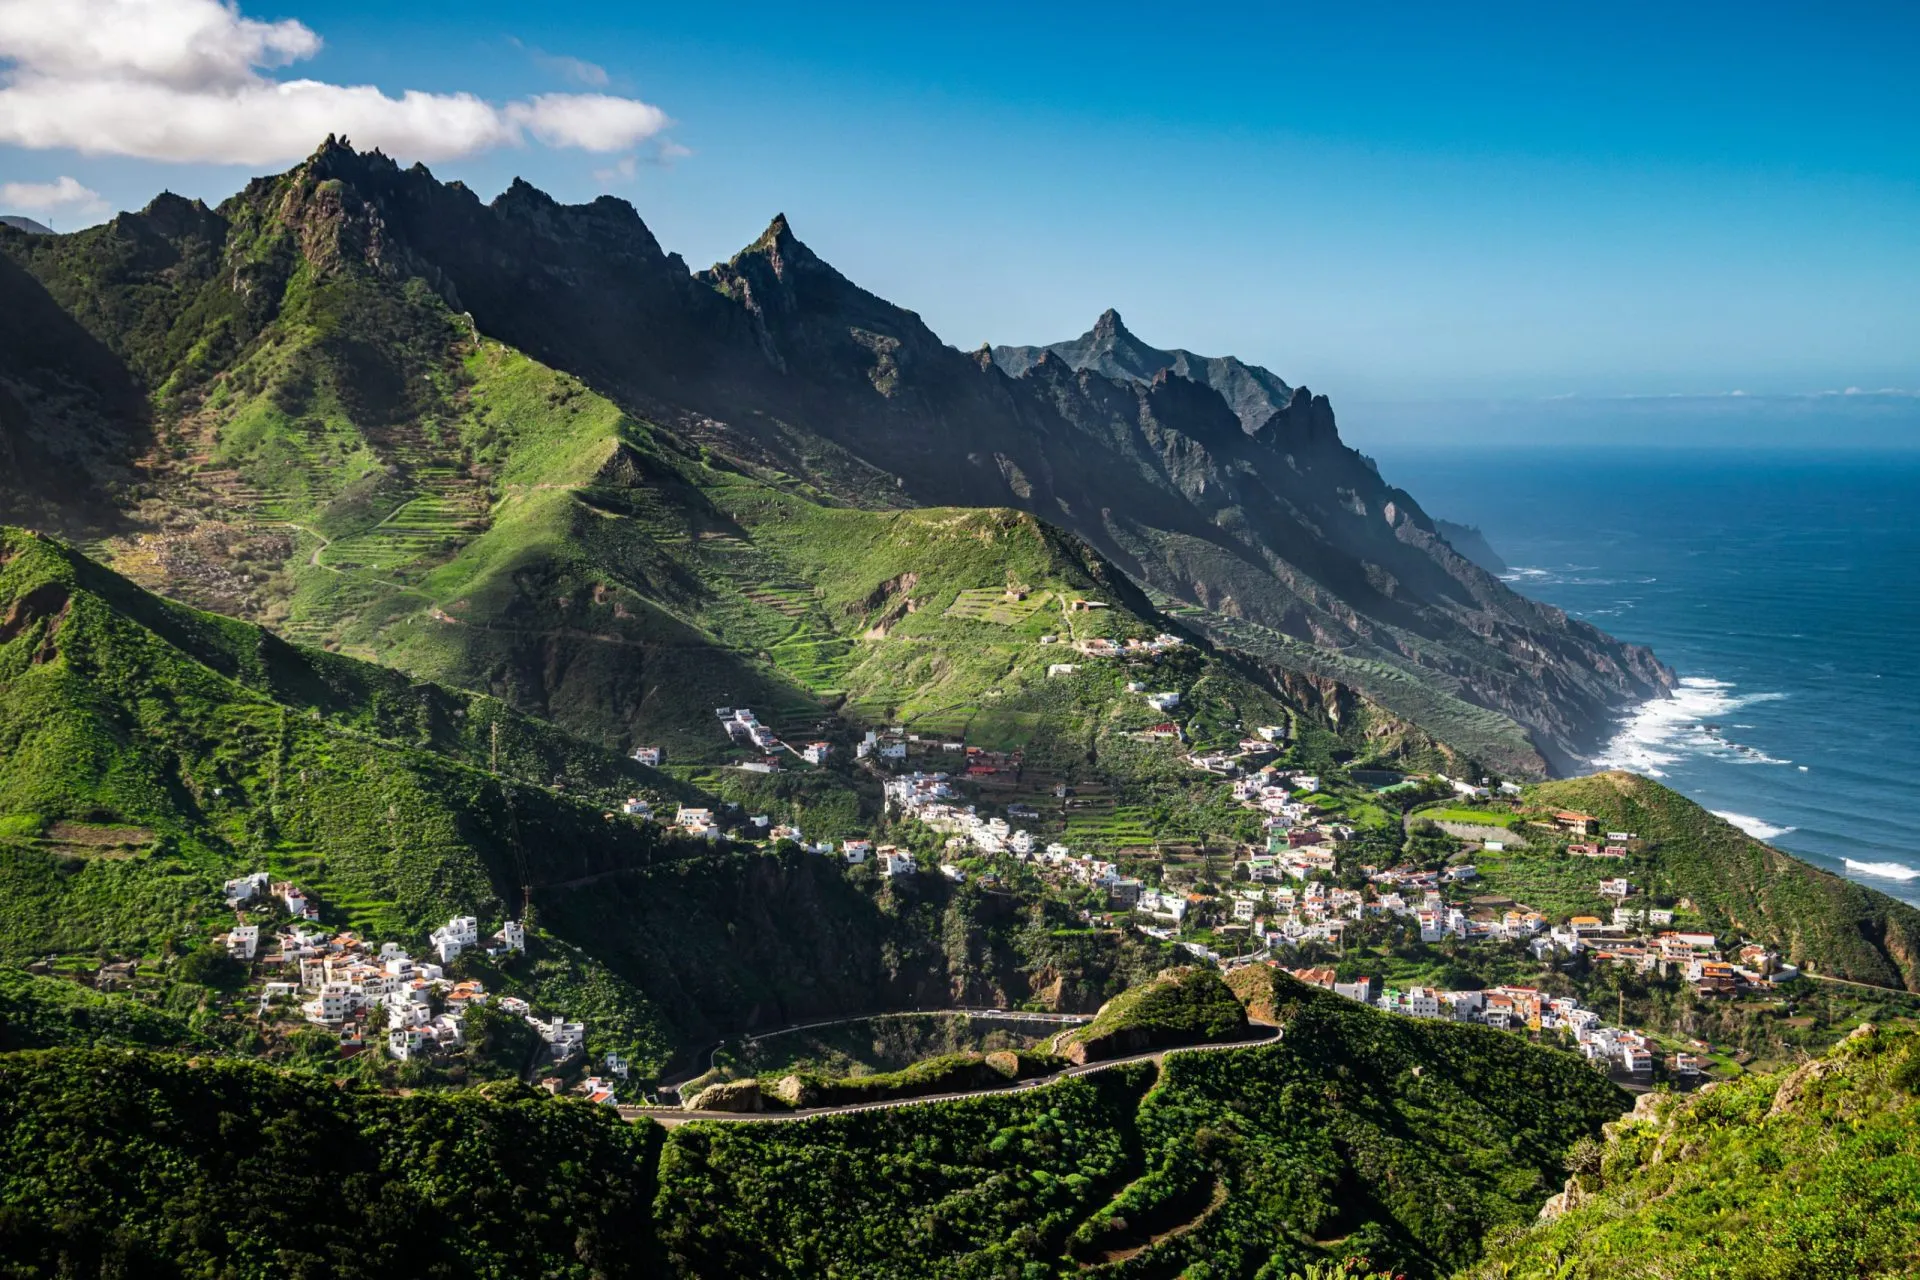 Anaga Rural park, view from El Bailadero viewpoint towards villages of Azanos and Taganana in Tenerife, Canary Islands, Spain.